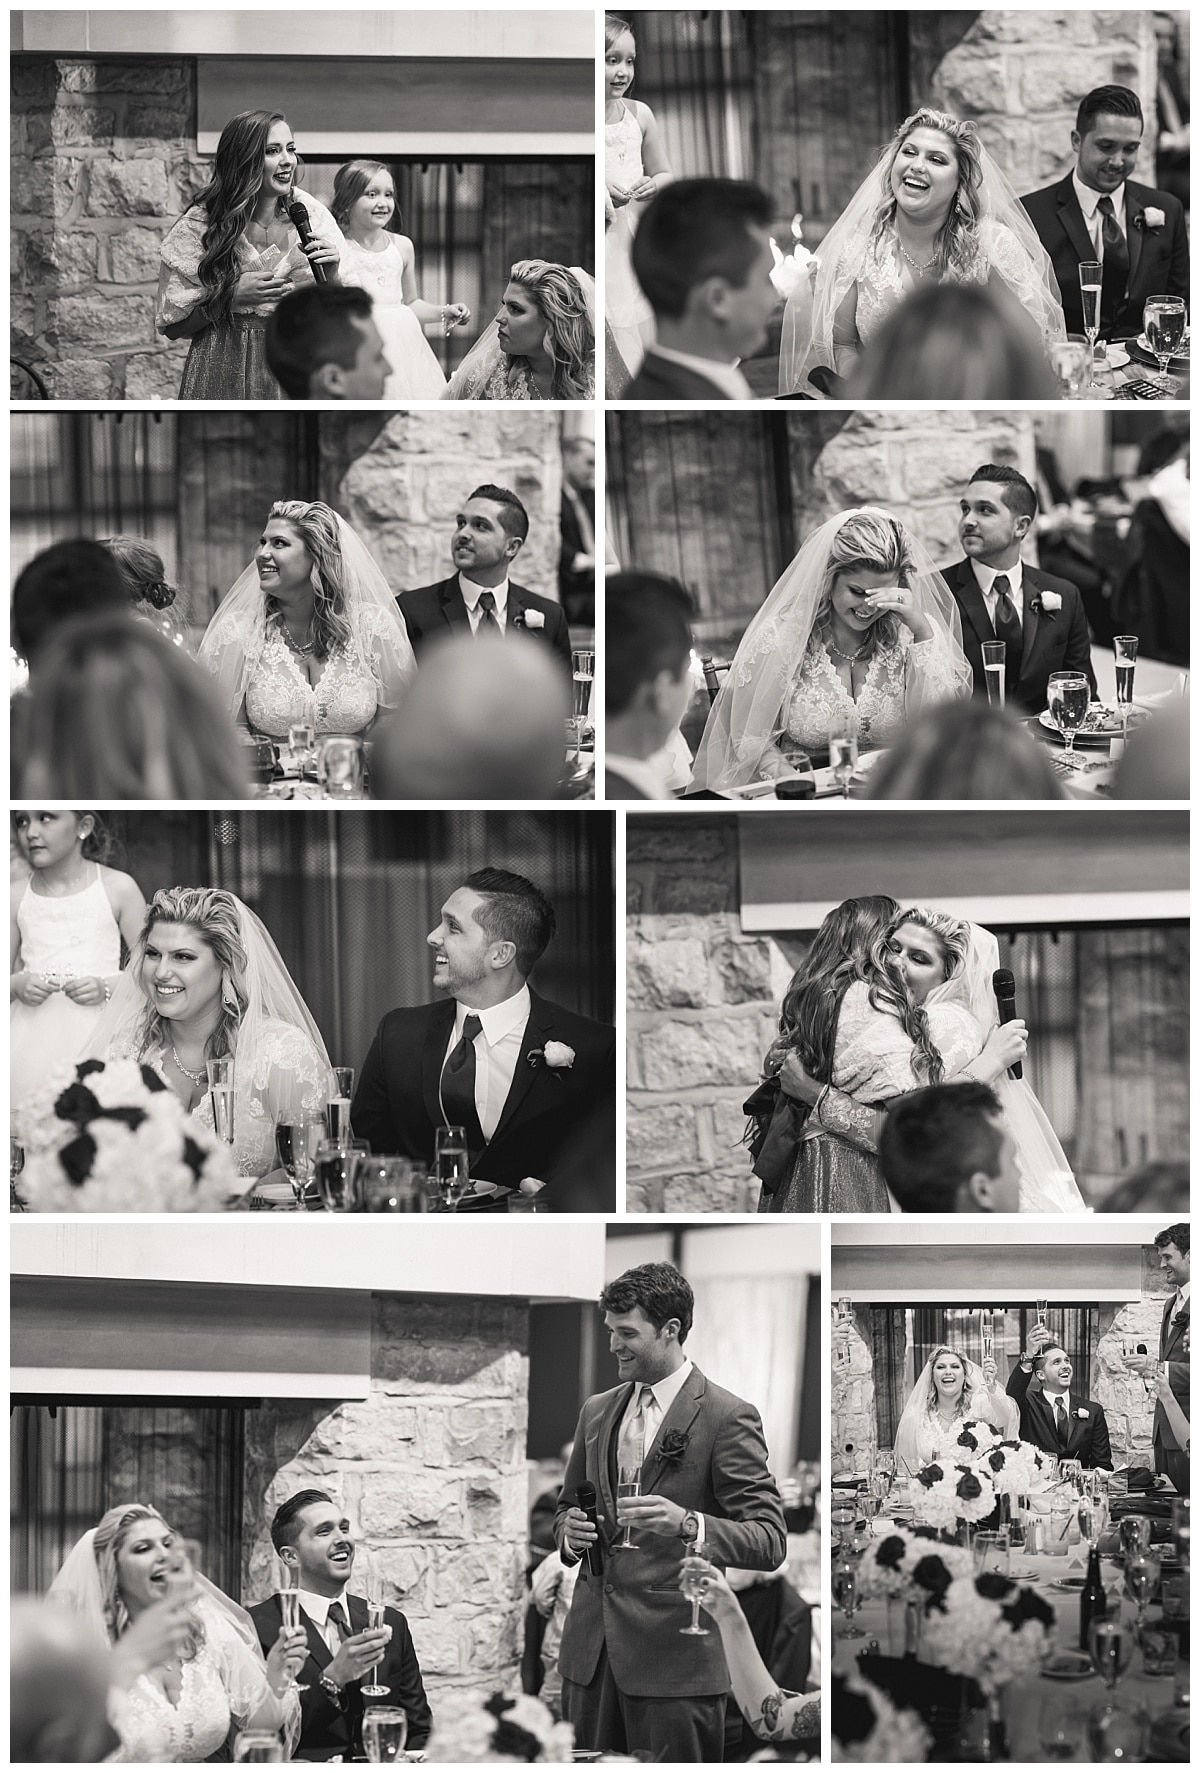 Wedding toast and speeches - Wedding photography by Curtis Wallis